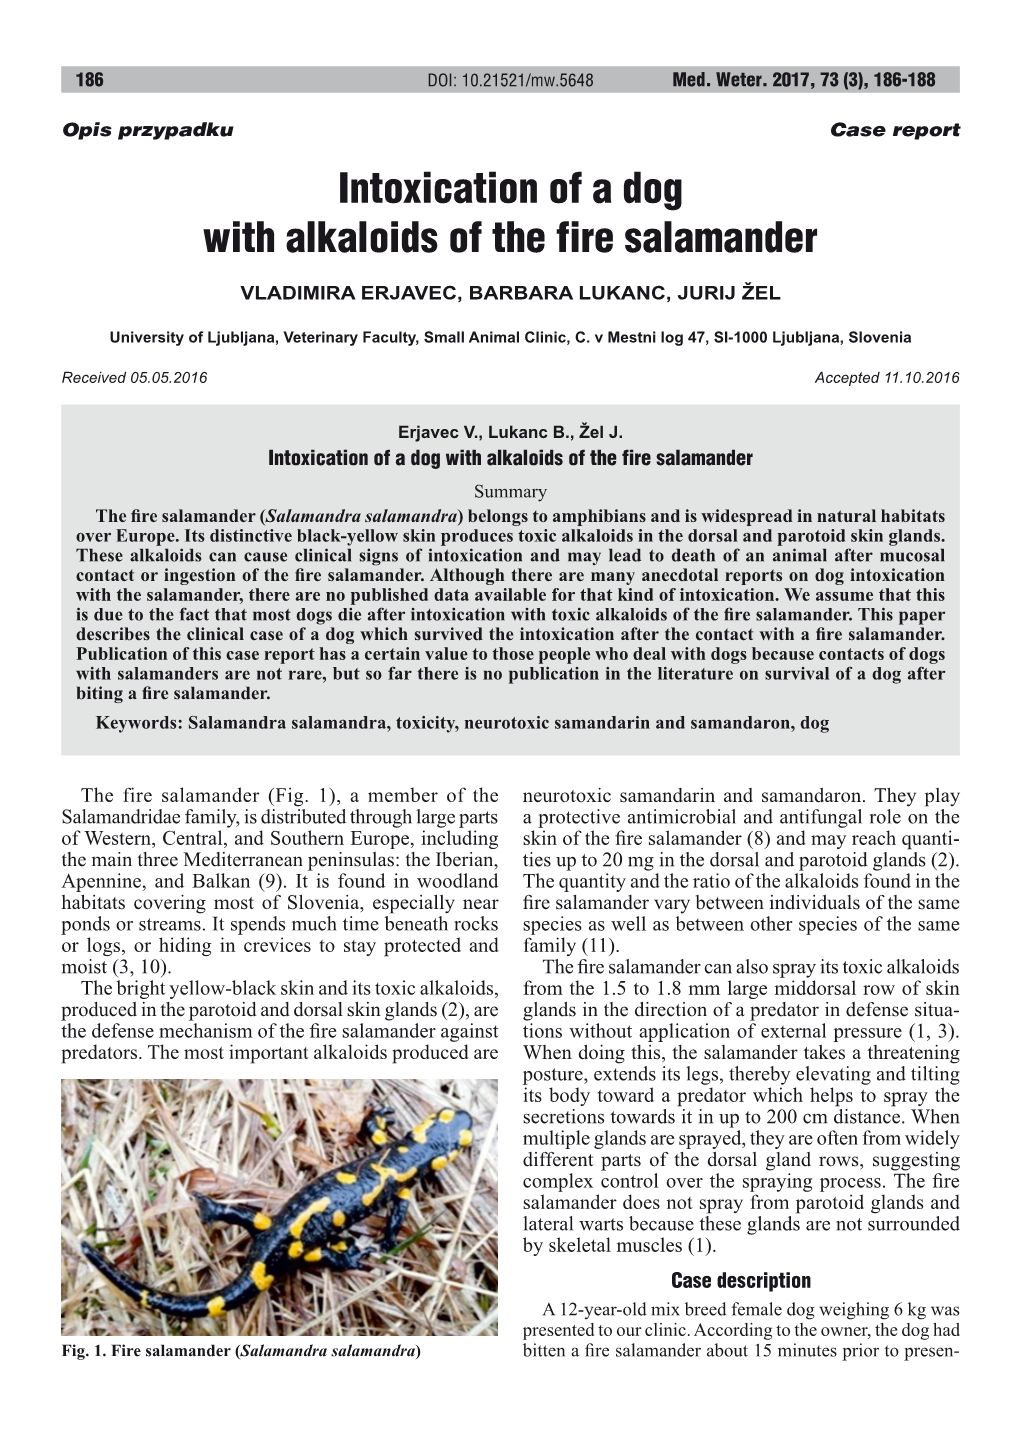 Intoxication of a Dog with Alkaloids of the Fire Salamander